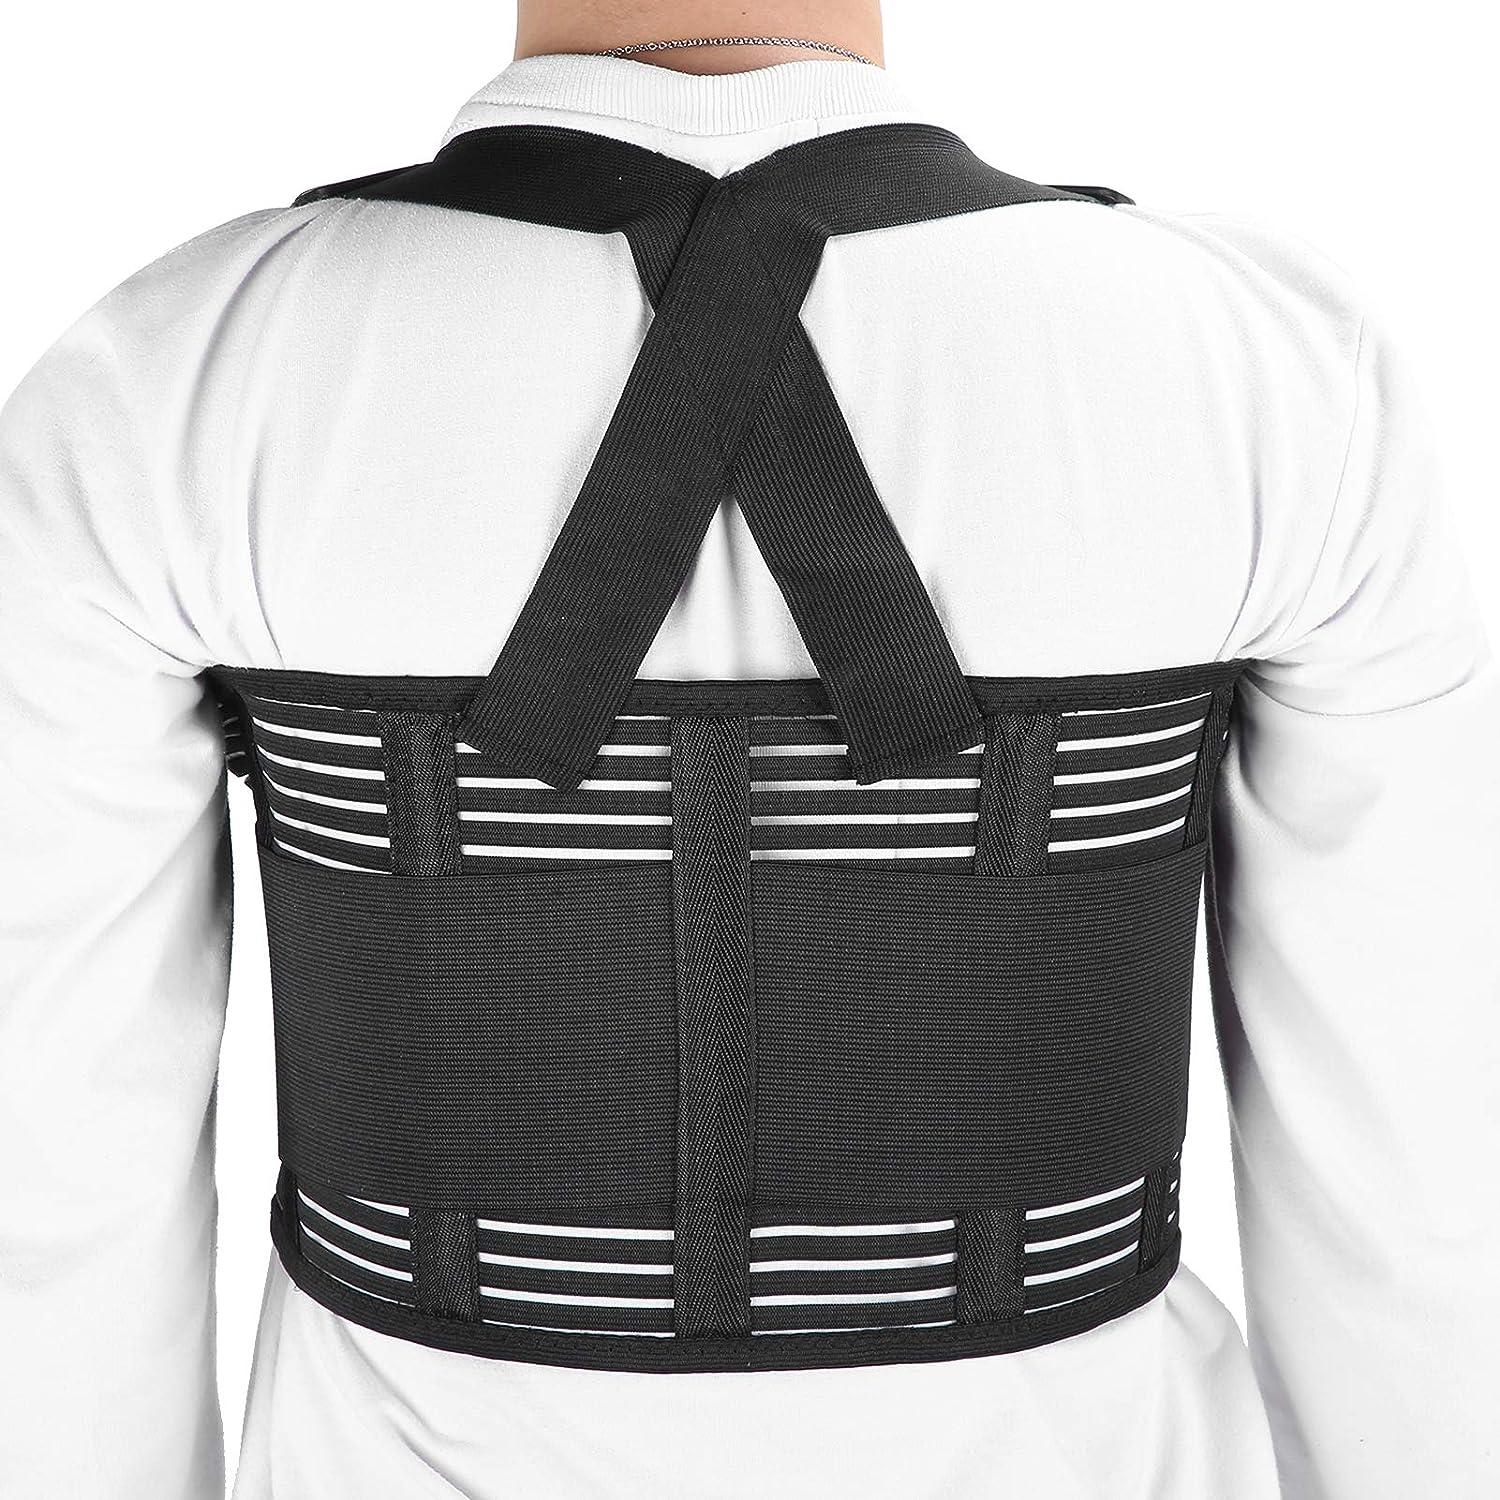 Chest Brace with Adjustable Straps